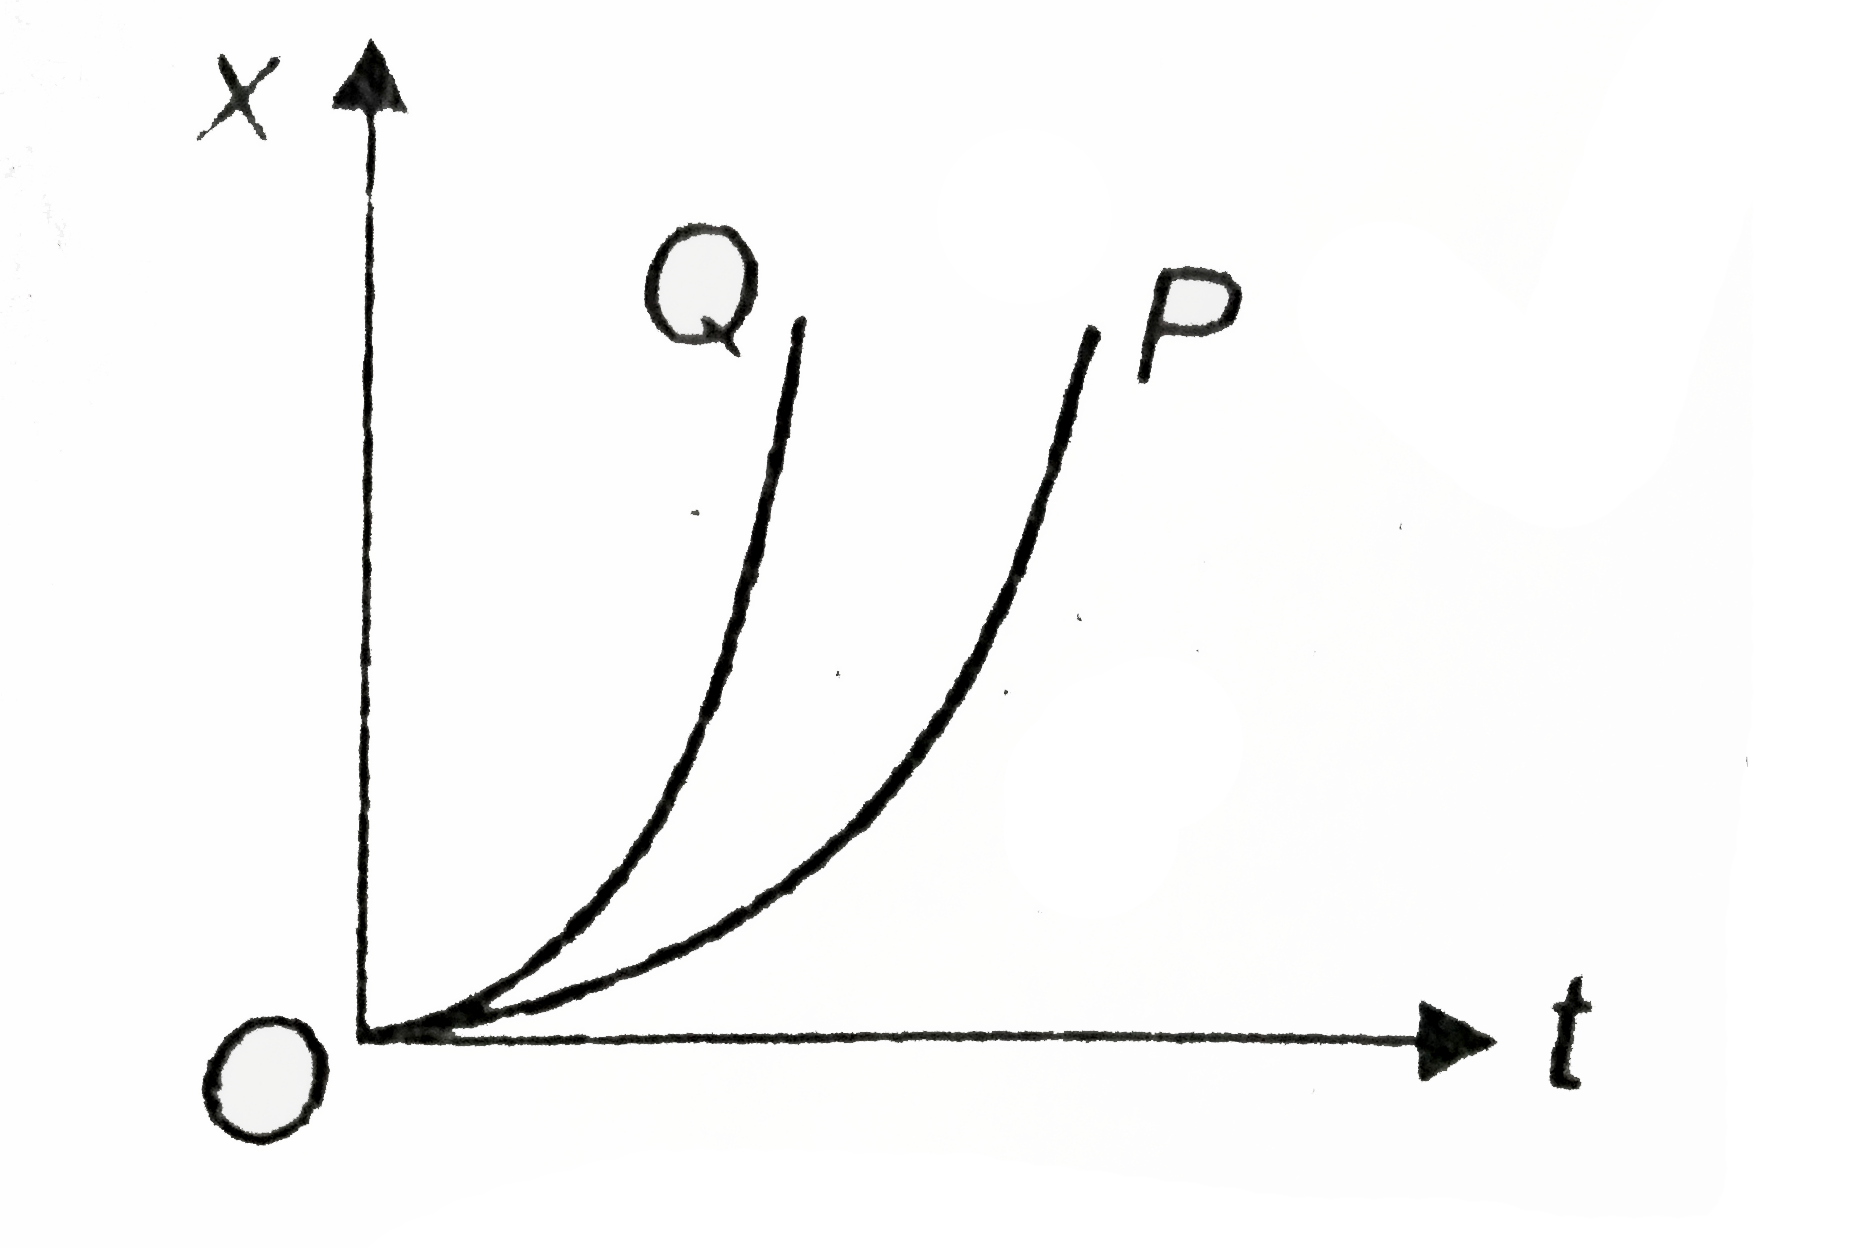 The position-time graph for two particles P and Q moving on x-axis is shown in the figure. Then